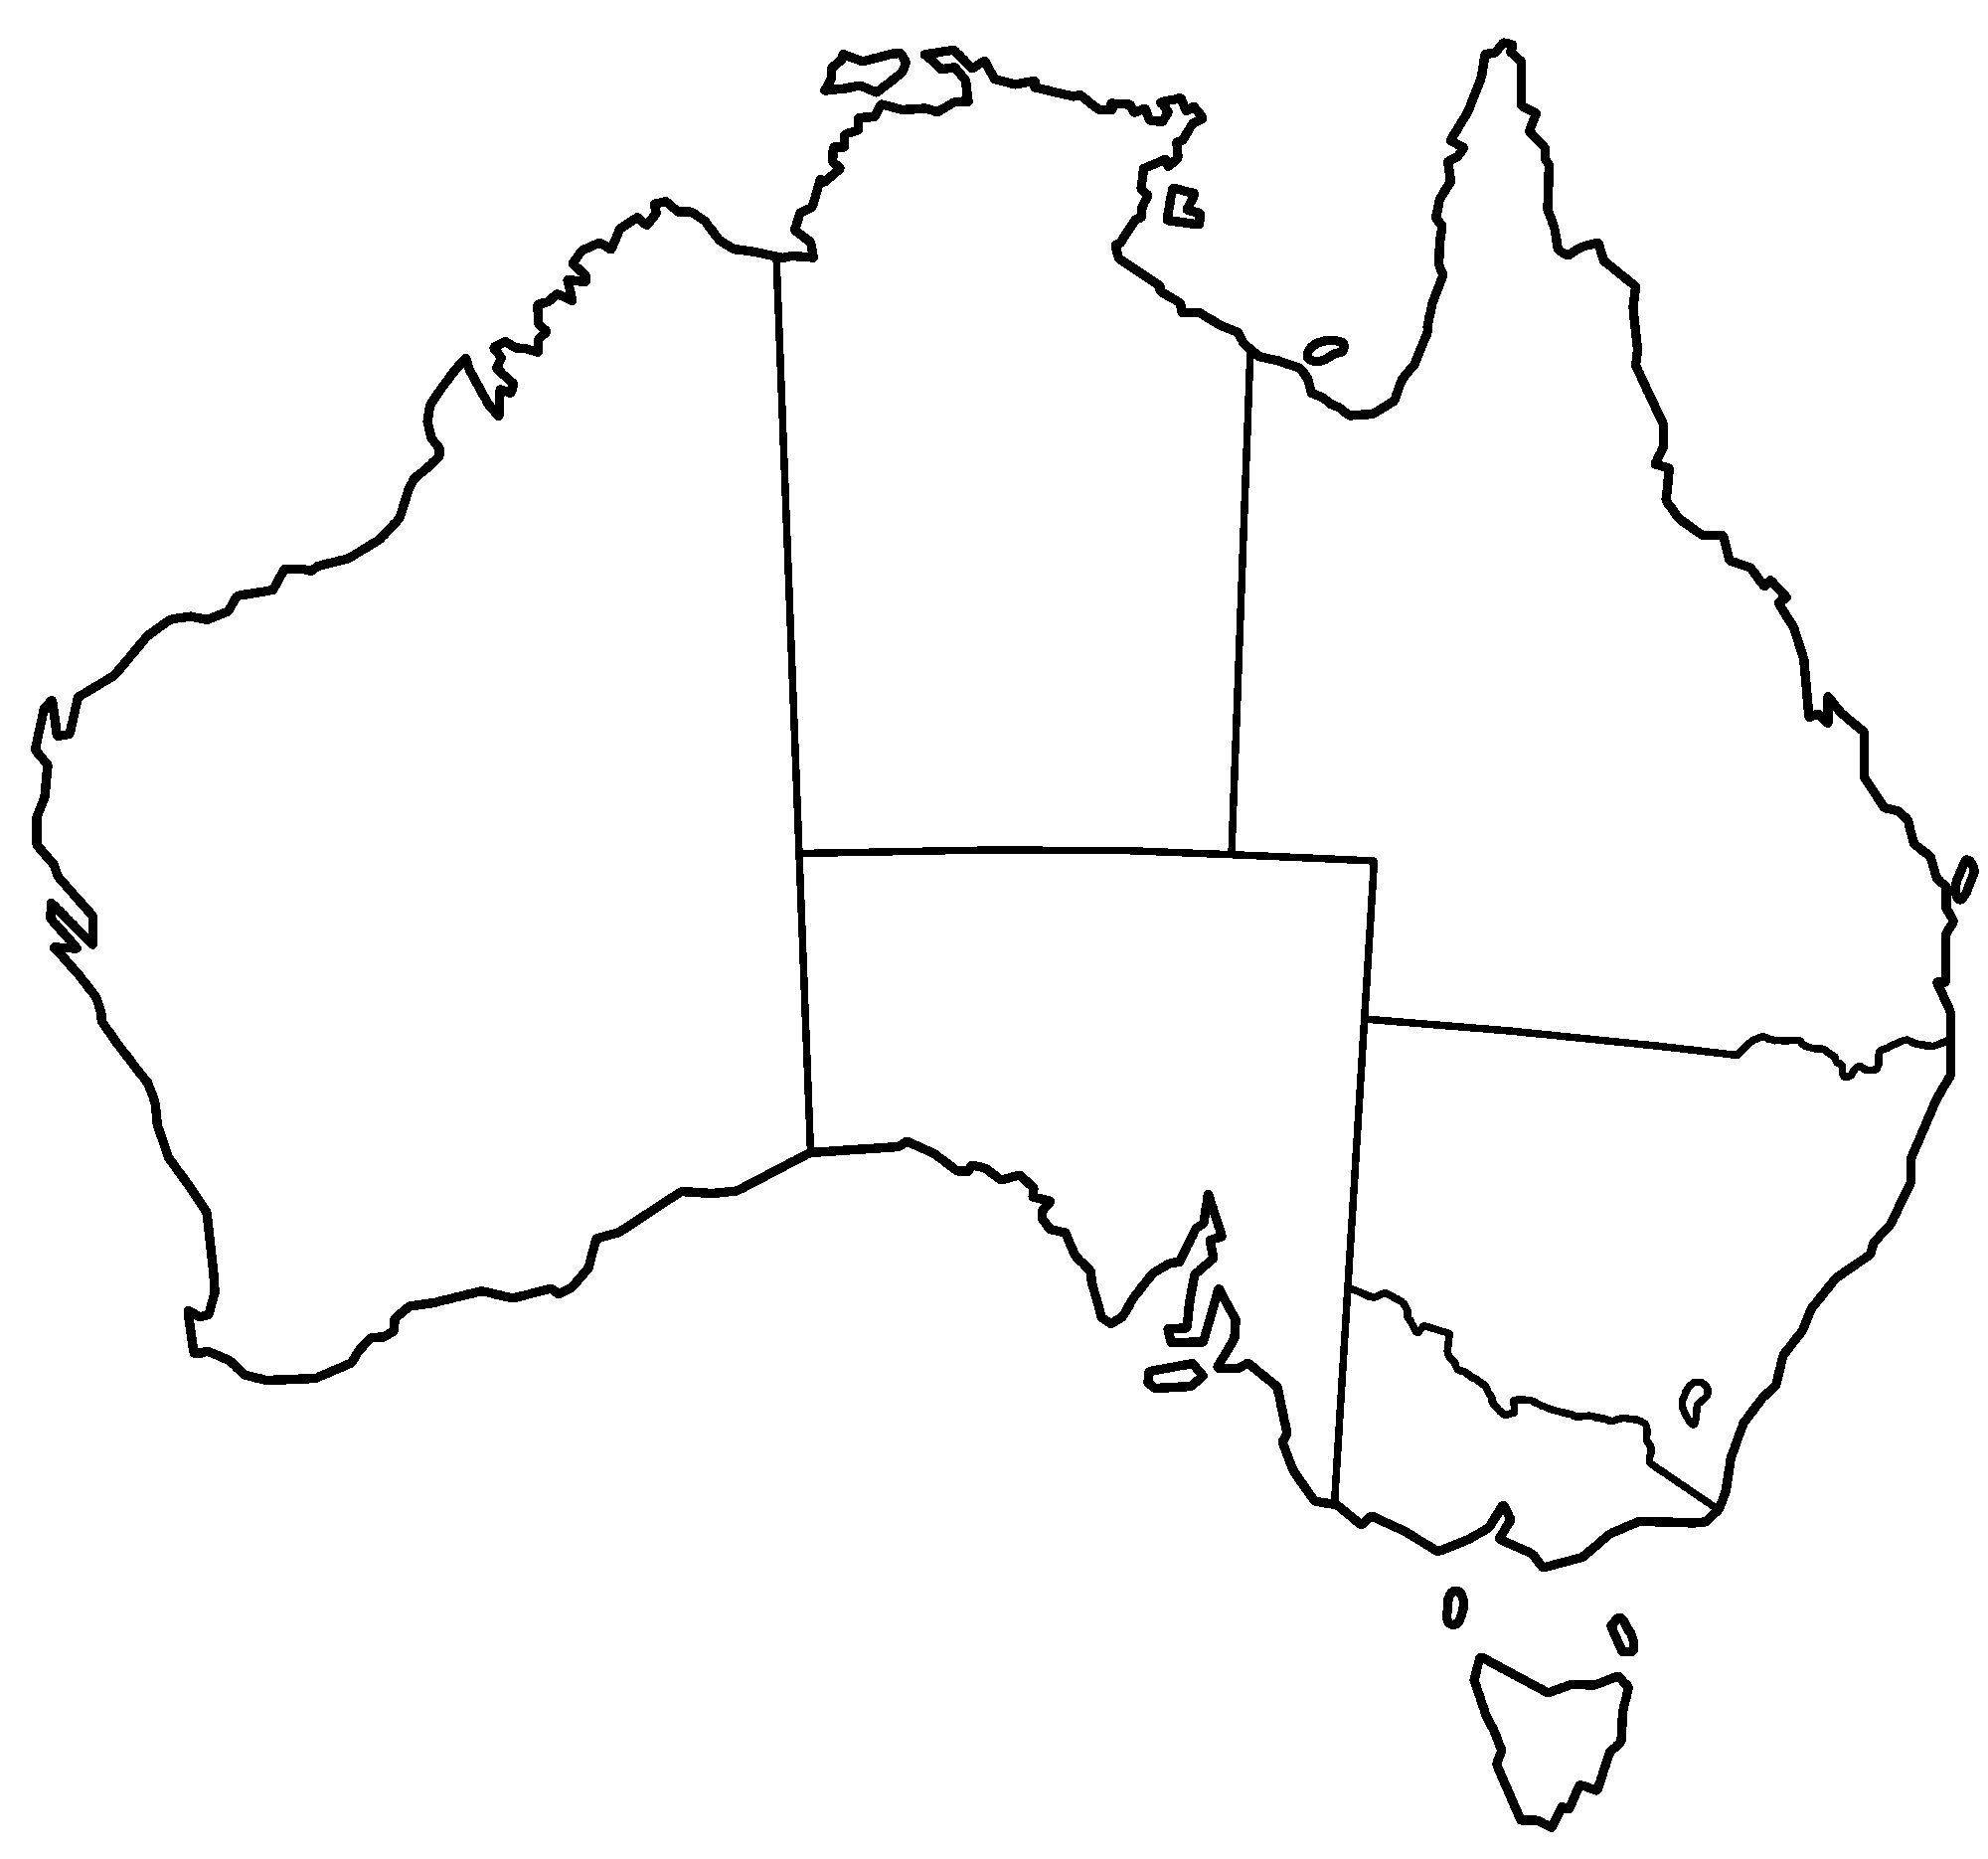 How To Draw Australia Map - Clipart library